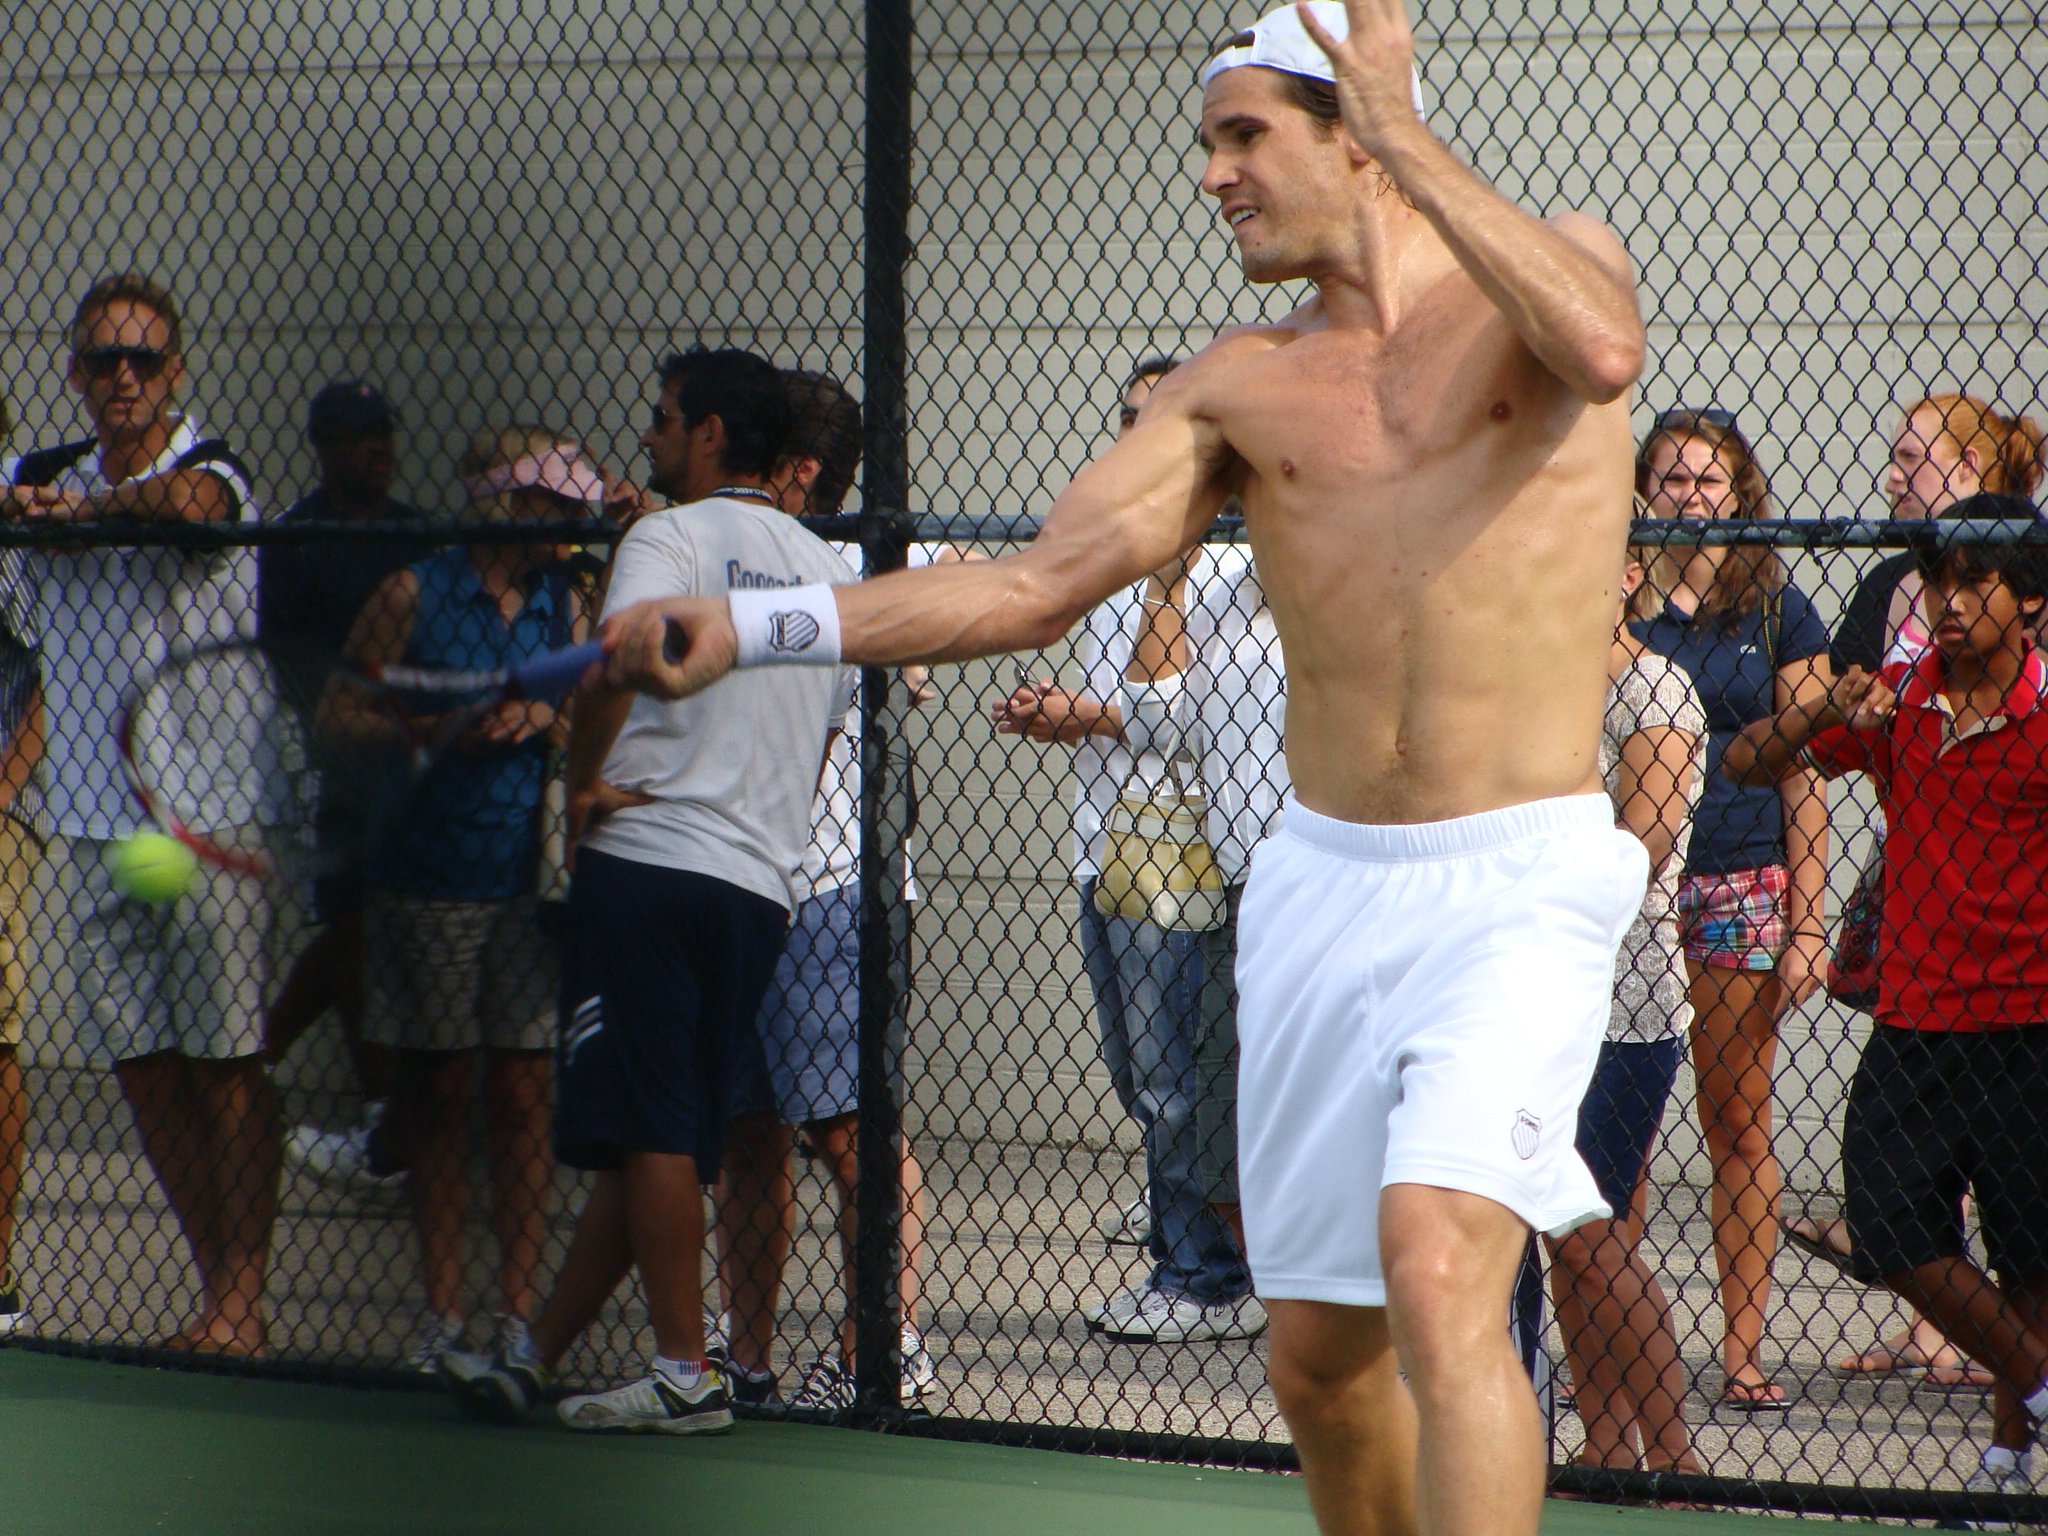 Shirtless Practice Series Tommy Haas - SoleyTennisTravels.com